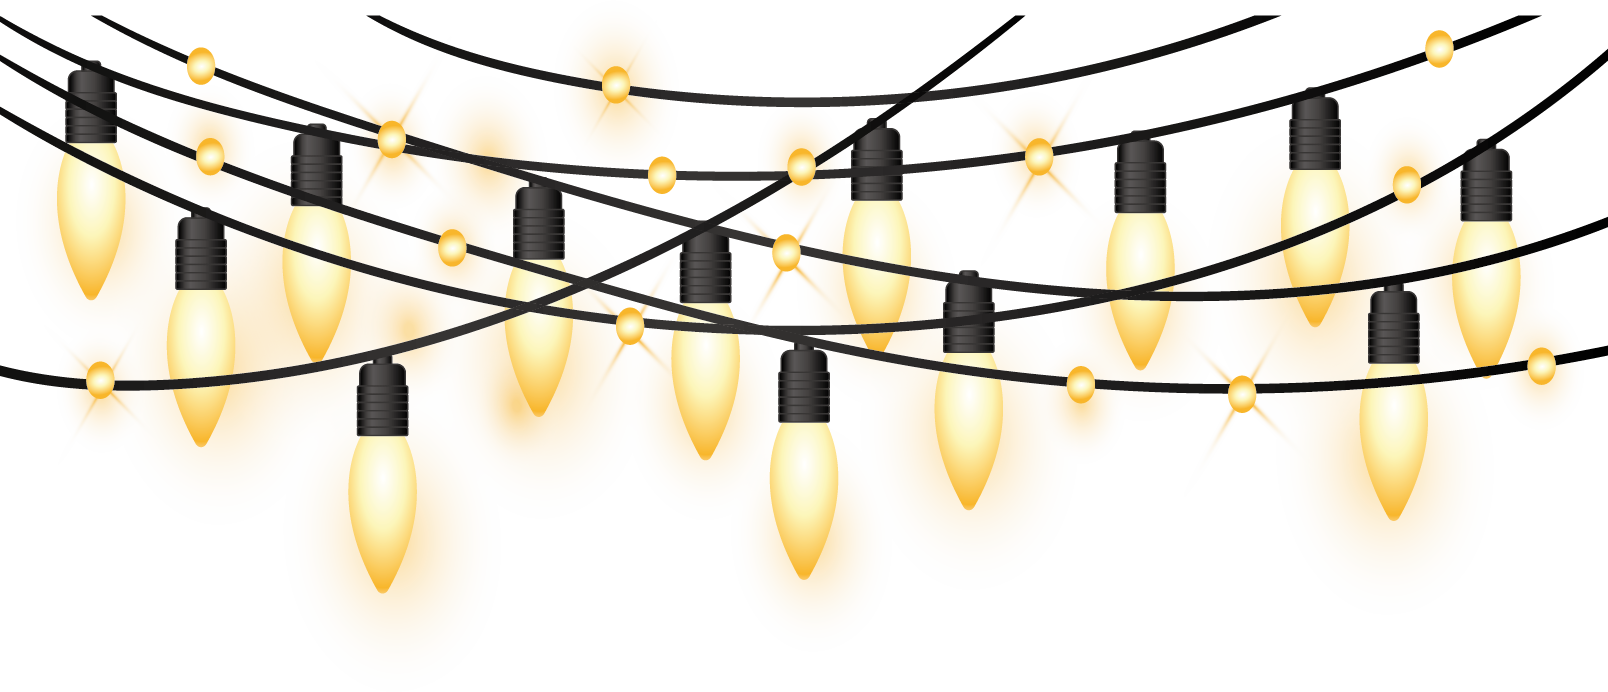 Lighting clipart party light, Lighting party light Transparent FREE for